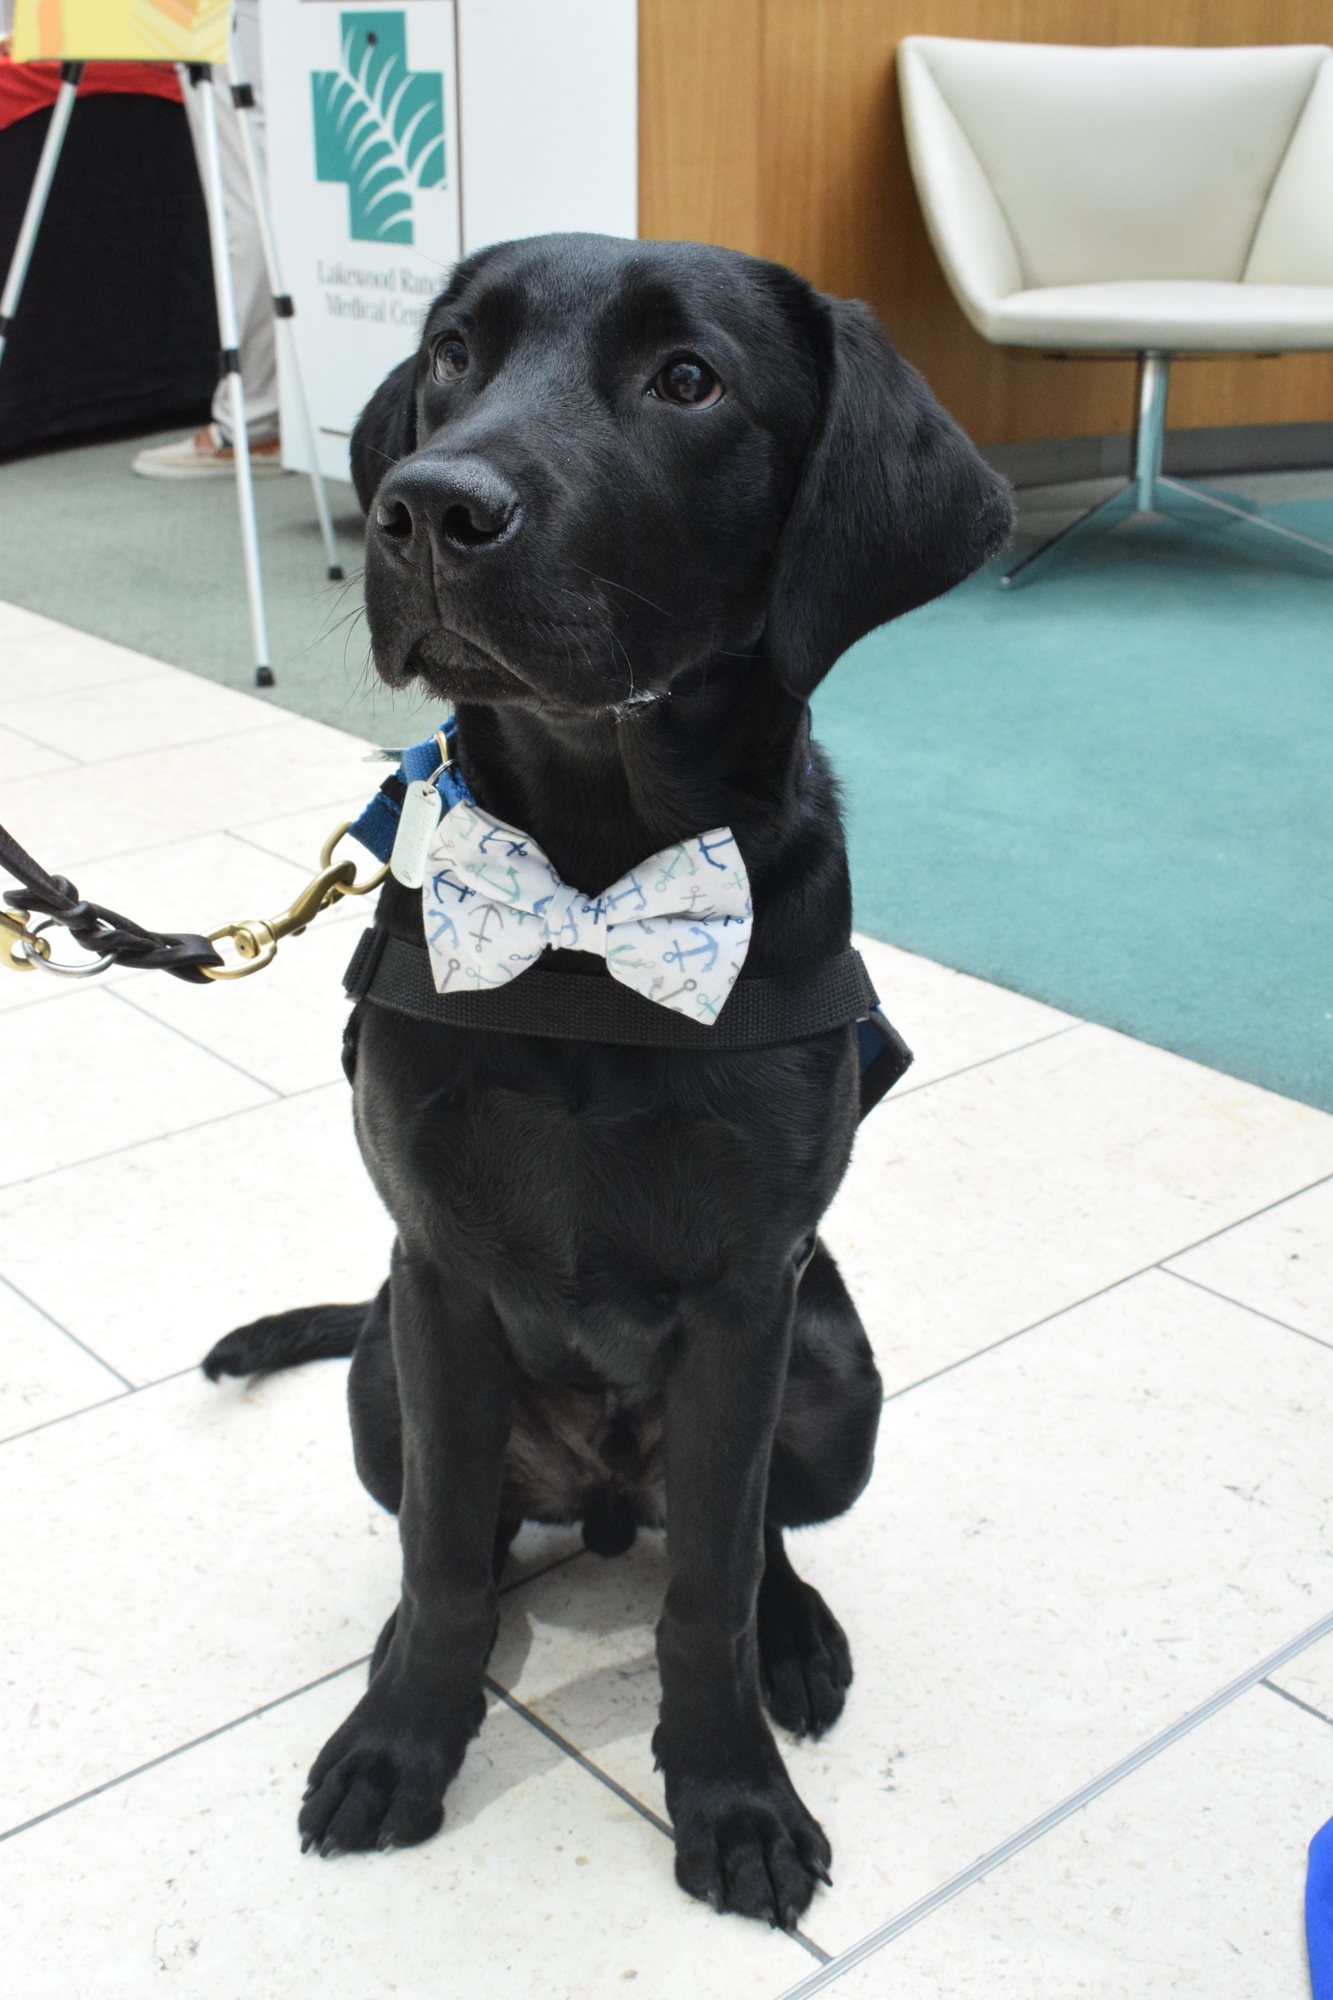 Andre is almost 6 months old and is learning to be a guide dog or service dog for Southeastern Guide Dogs.